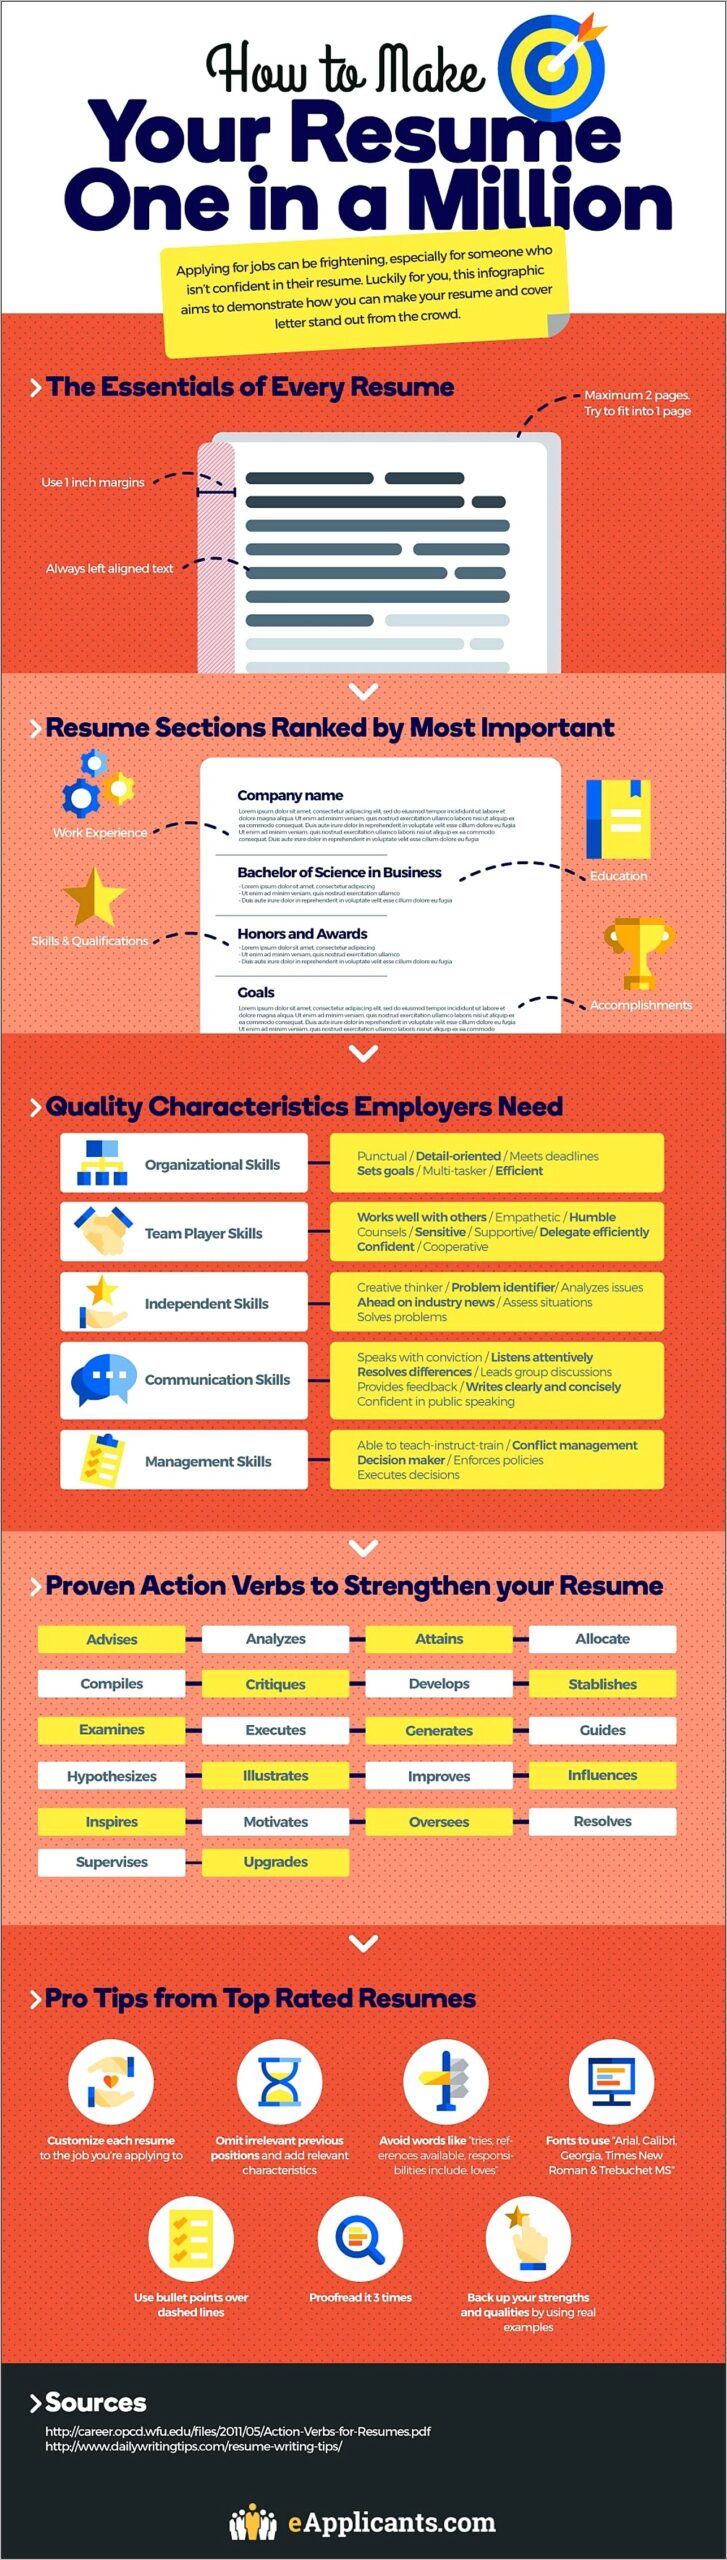 Best Action Words To Use In Resume